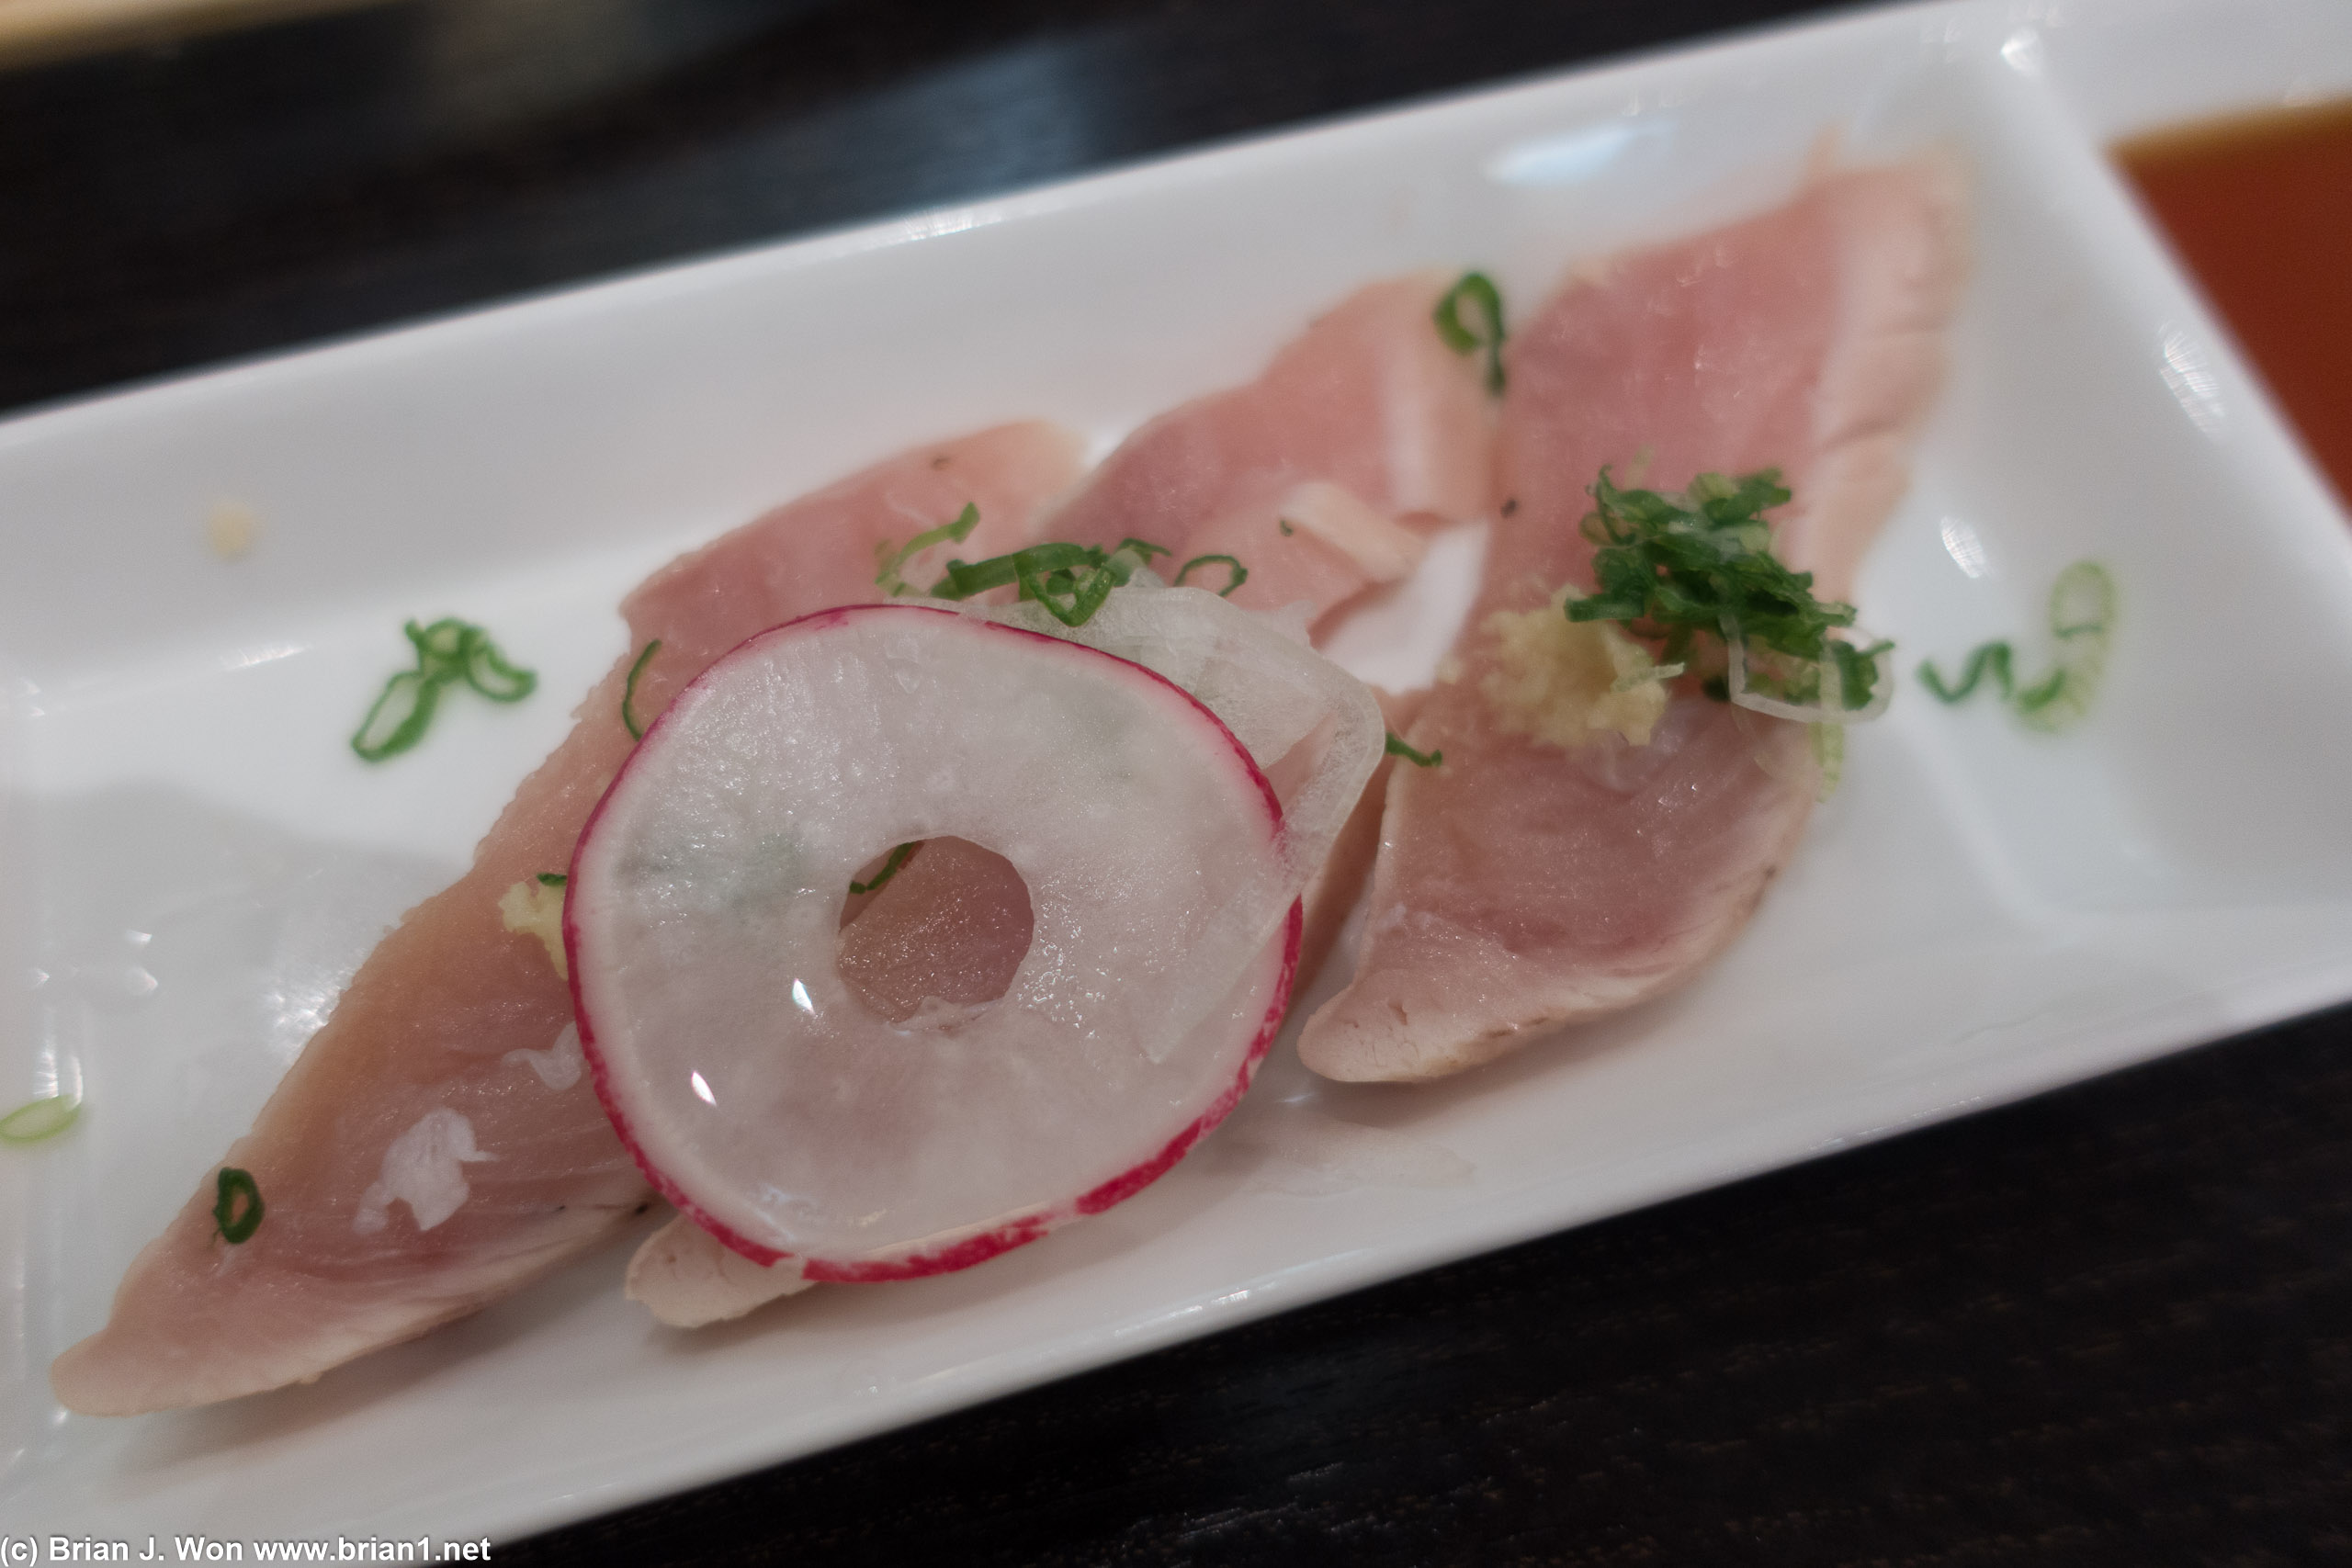 Albacore sashimi cuts were lower quality than expected.